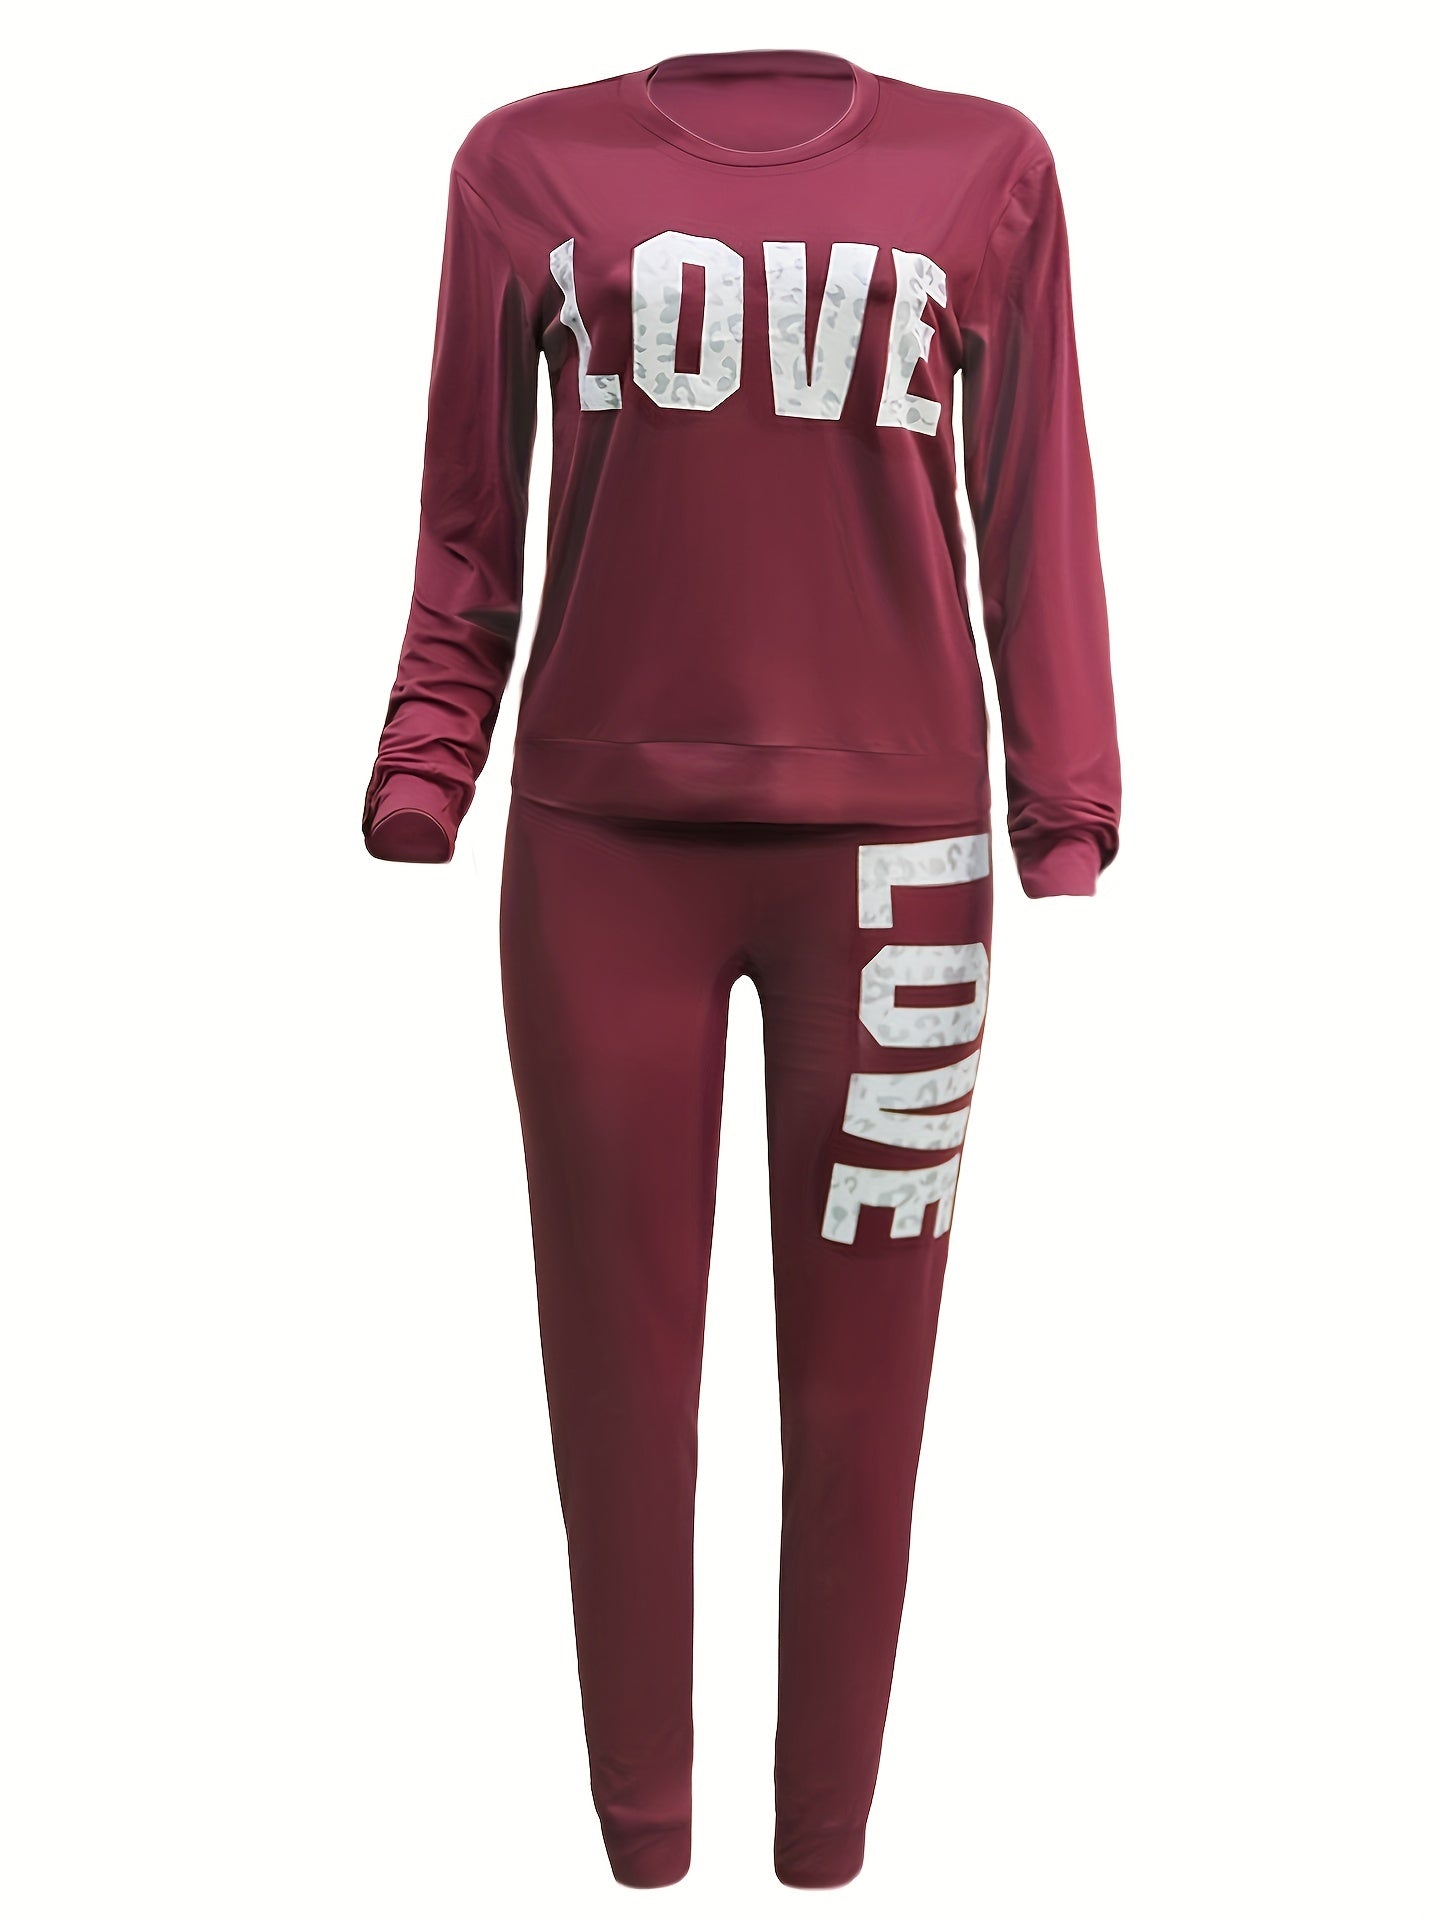 Women's Sports Two-piece Set, Love Letter Print Long Sleeve Top & Pants For Fall & Winter, Women's Clothing